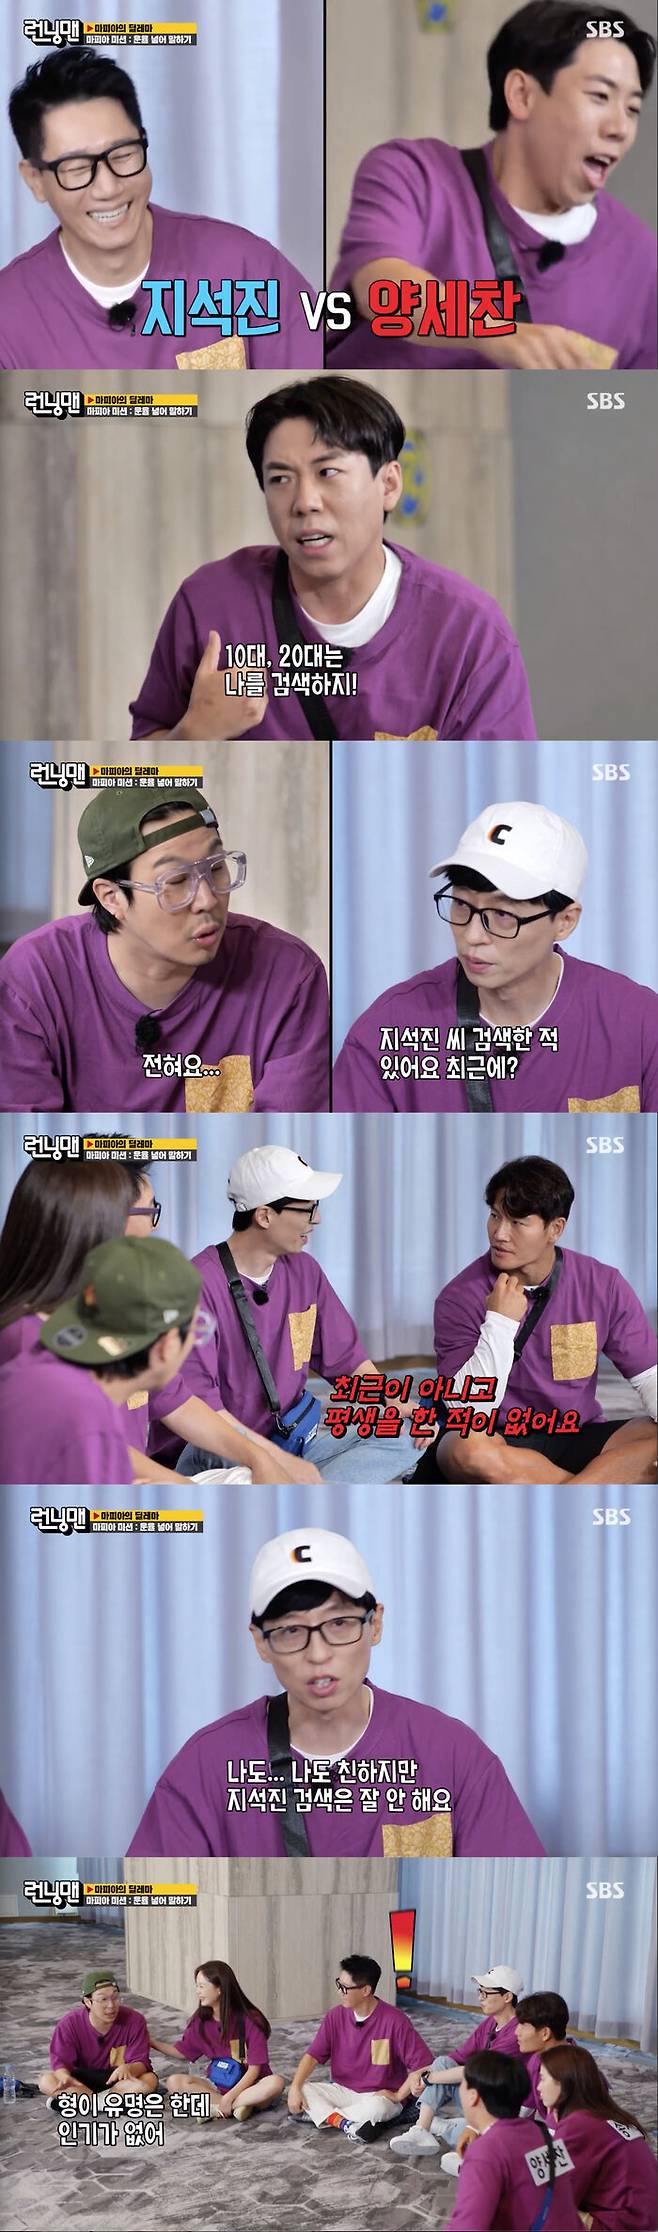 Ji Suk-jin Search amount Data of Running Man members has been released.On SBS Running Man broadcasted on the 12th, he conducted the dilemma race of the mafia.On the day of the show, the members predicted the results of each members Search amount Battle; the first was Ji Suk-jin and Yang Se-chans Battle.Yang Se-chan insisted that 5,60s do not search, but teenagers and 20s do search.Yoo Jae-Suk then asked the members if they had ever looked at Ji Suk-jin, saying, Our Data is credible to some extent.Kim Jong-kook said, Its not recent, Ive never done my whole life, and Yoo Jae-Suk also said, Im close, but Ji Suk-jin does not search.Ji Suk-jin, who listened to this, laughed and laughed, Do you think Im turning off you?And Haha said, I finally watch my brother once a day because of YouTube. He revealed his rivalry about Kim Jong-kook and attracted attention.Haha also said of Ji Suk-jin, My brother is famous but not popular.Jeon So-min said, In fact, my brother has become a little more famous as he cried.